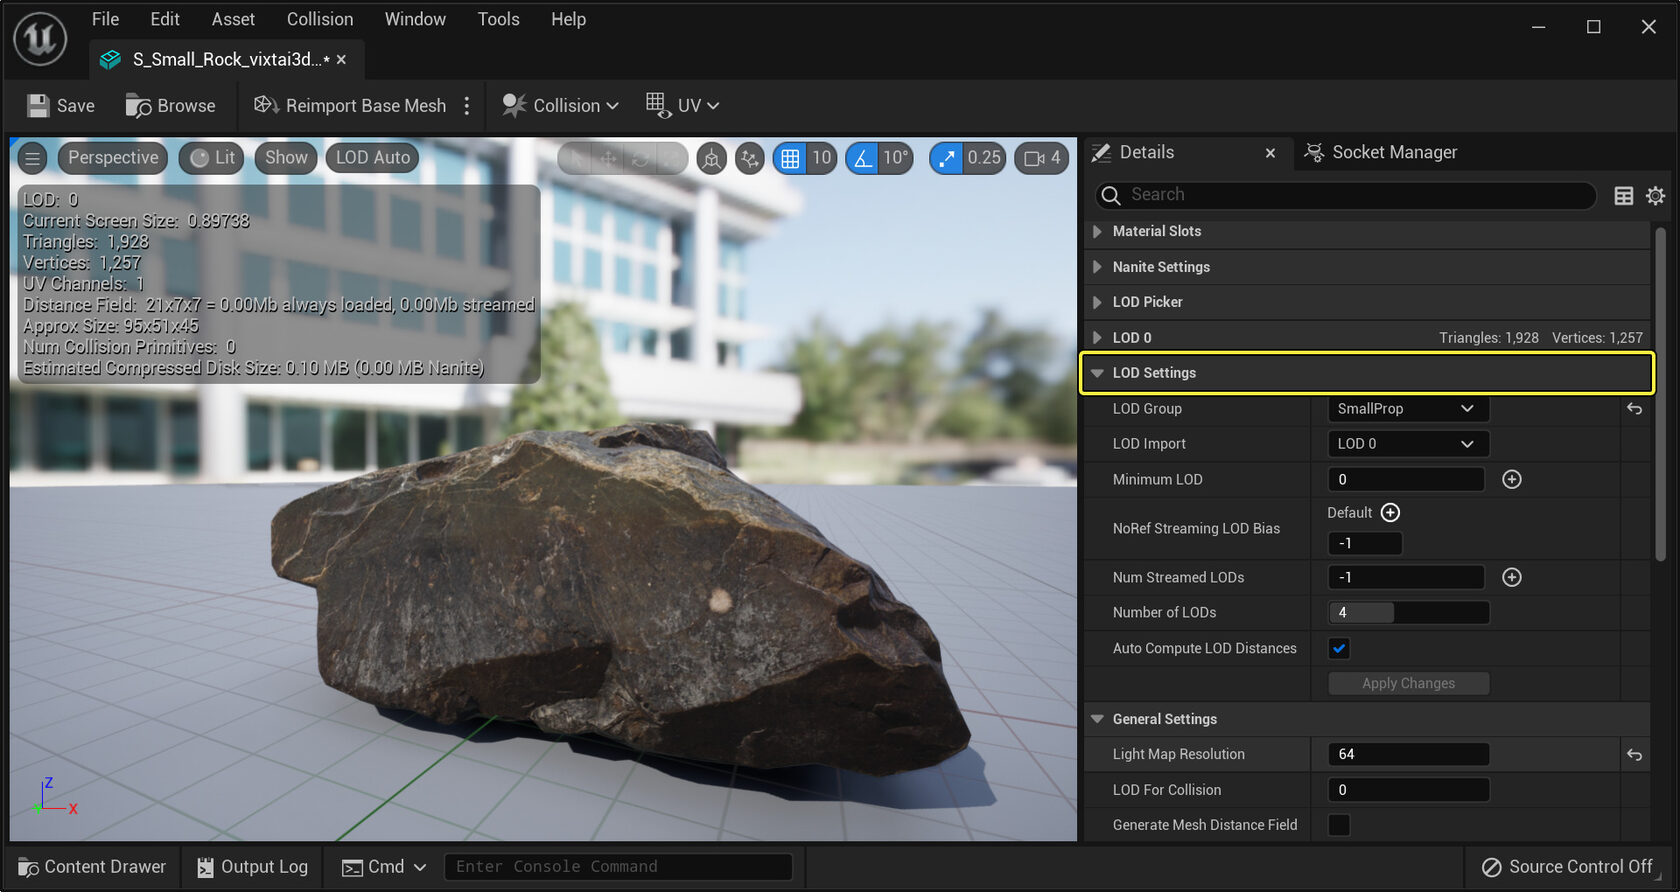 Optimization for Games: Settings, Materials, Textures & Commands